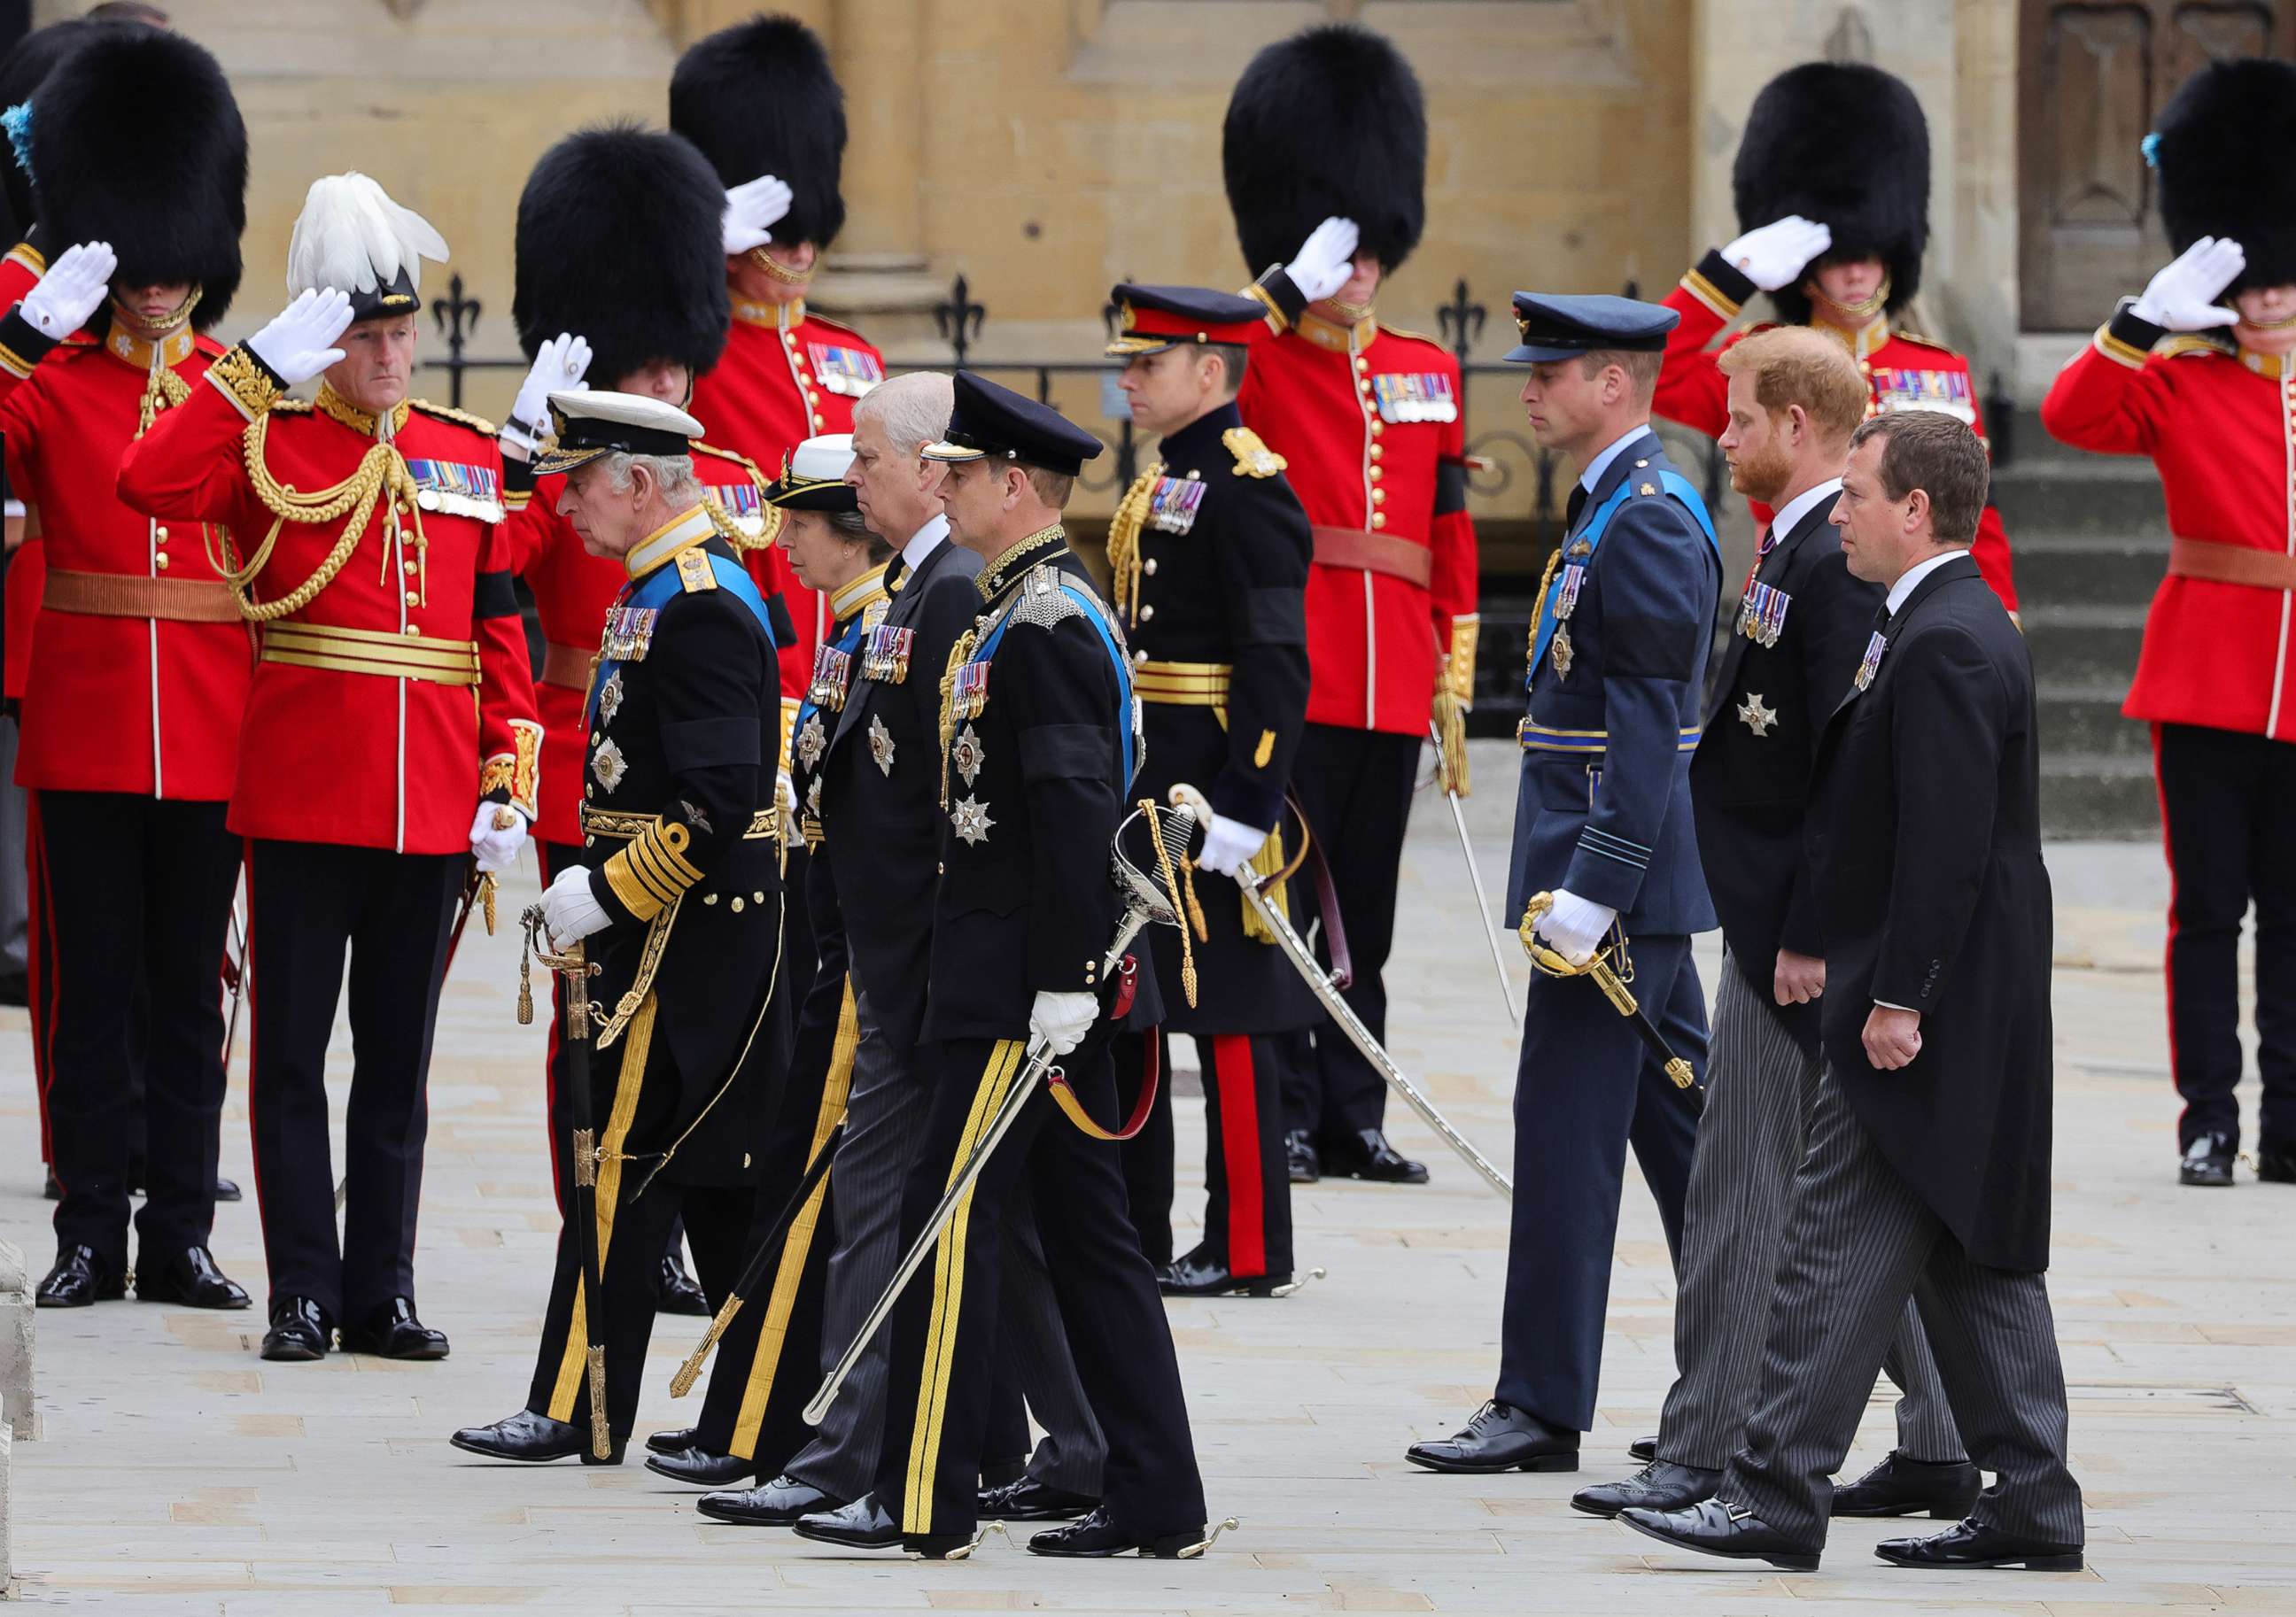 PHOTO: King Charles III, Anne, Princess Royal, Prince Andrew, Prince Edward, Prince William, Prince Harry, and Peter Phillips arrive at Westminster Abbey for the State Funeral of Queen Elizabeth II on Sept. 19, 2022 in London.